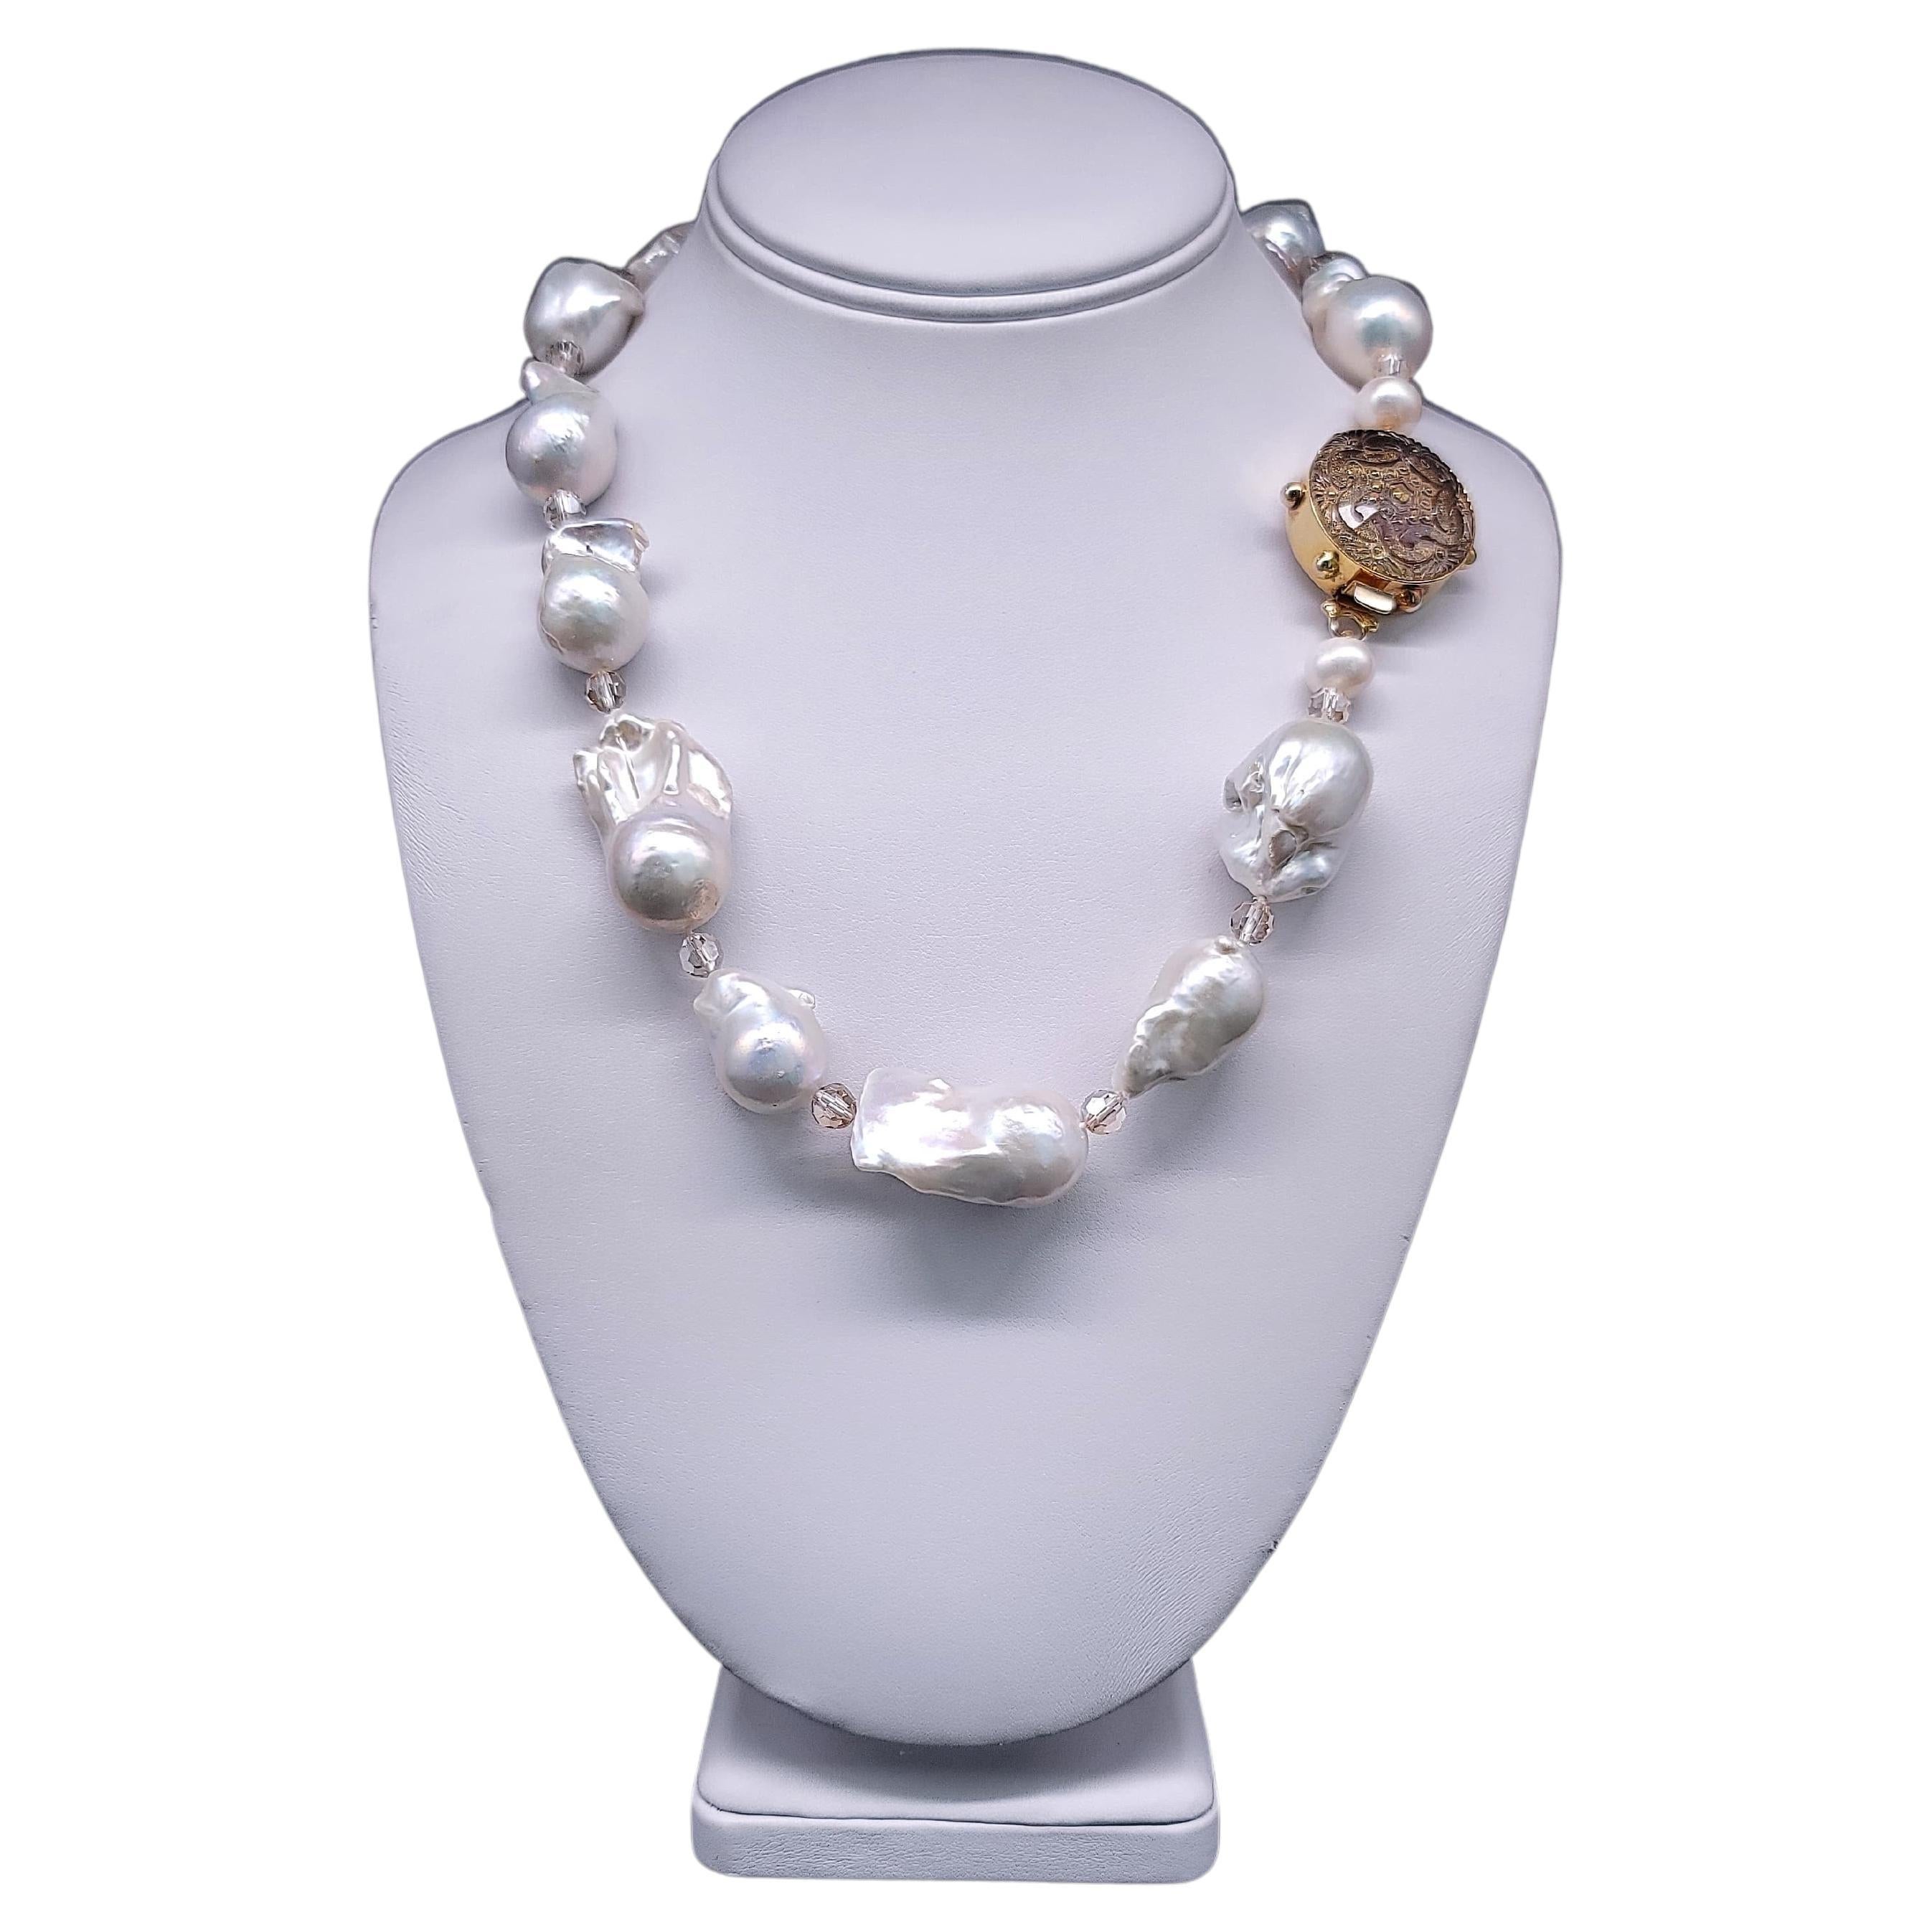 A.Jeschel Glamorous Single Strand Necklace of Large Baroque Pearls.